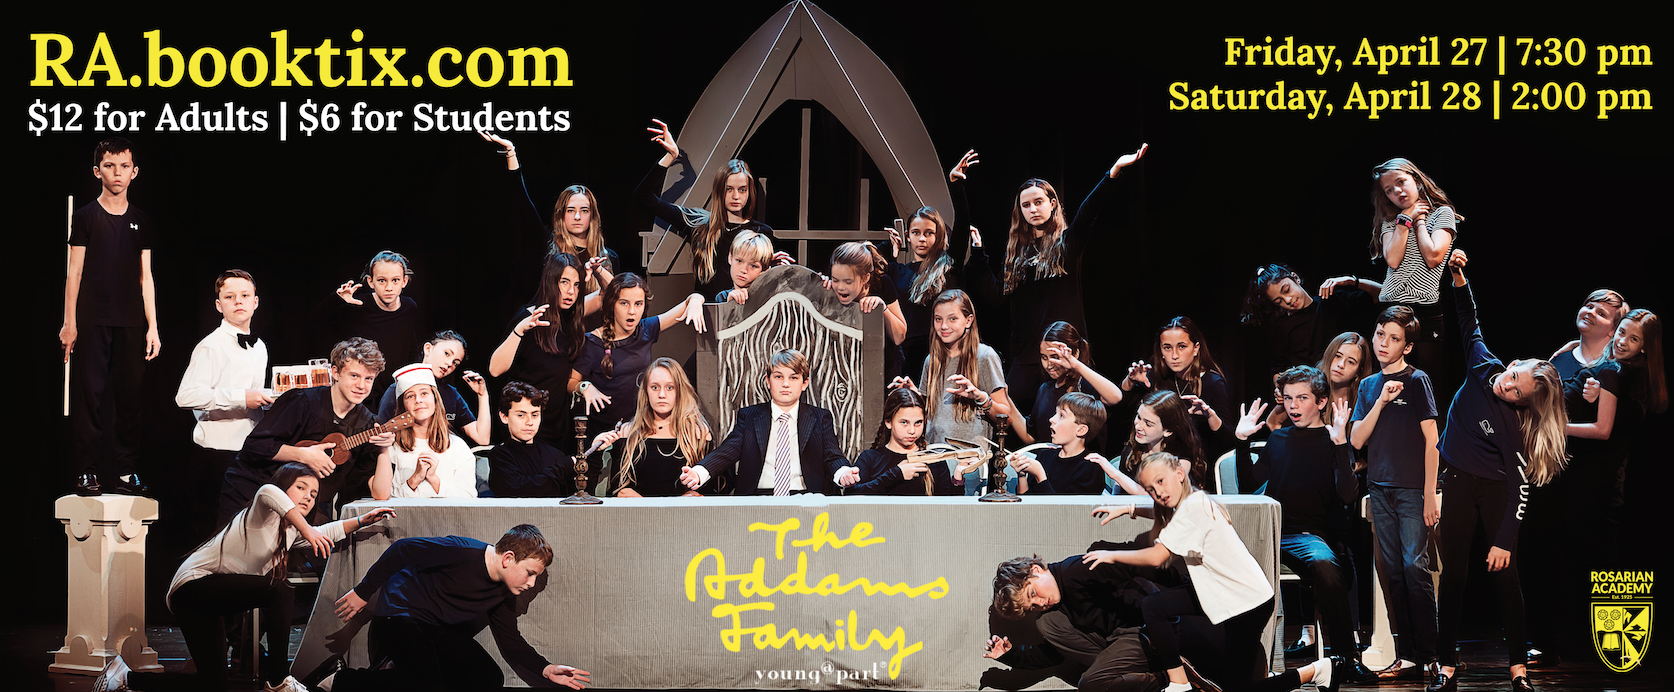 The Addams Family, The 2018 Rosarian Addams Family Musical, Addams